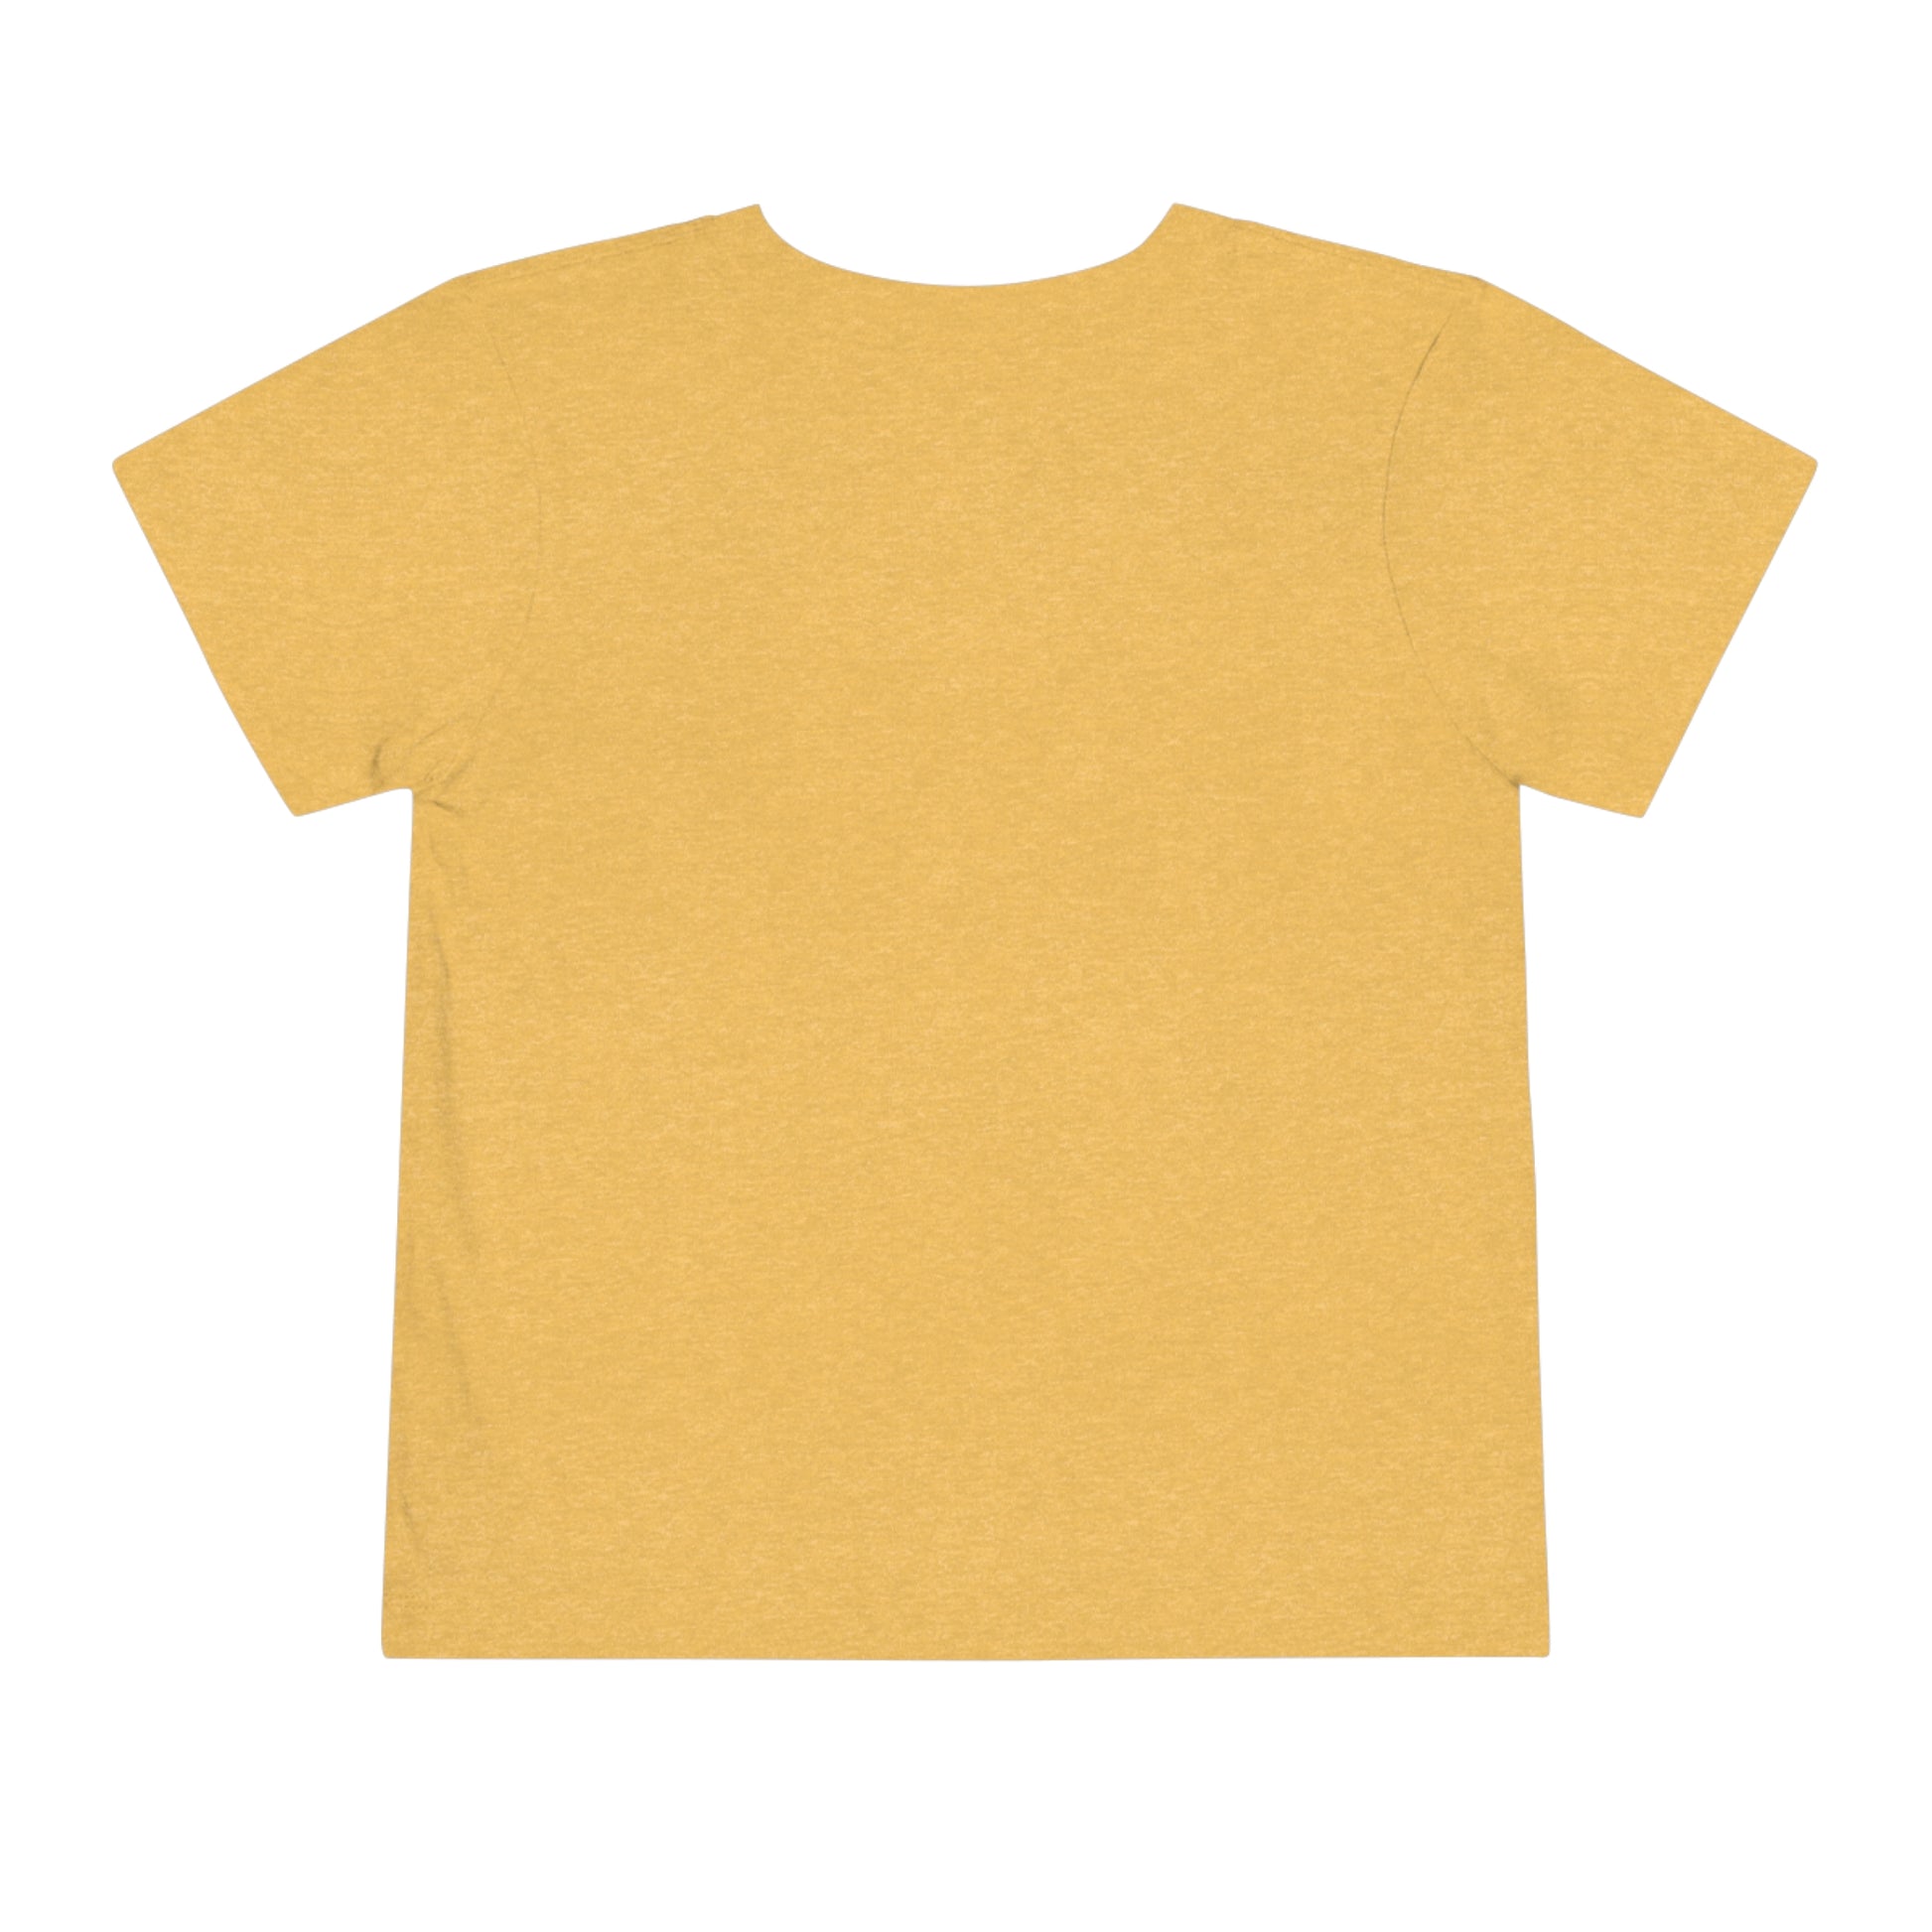 Flat back view of the Heather Yellow Gold shirt